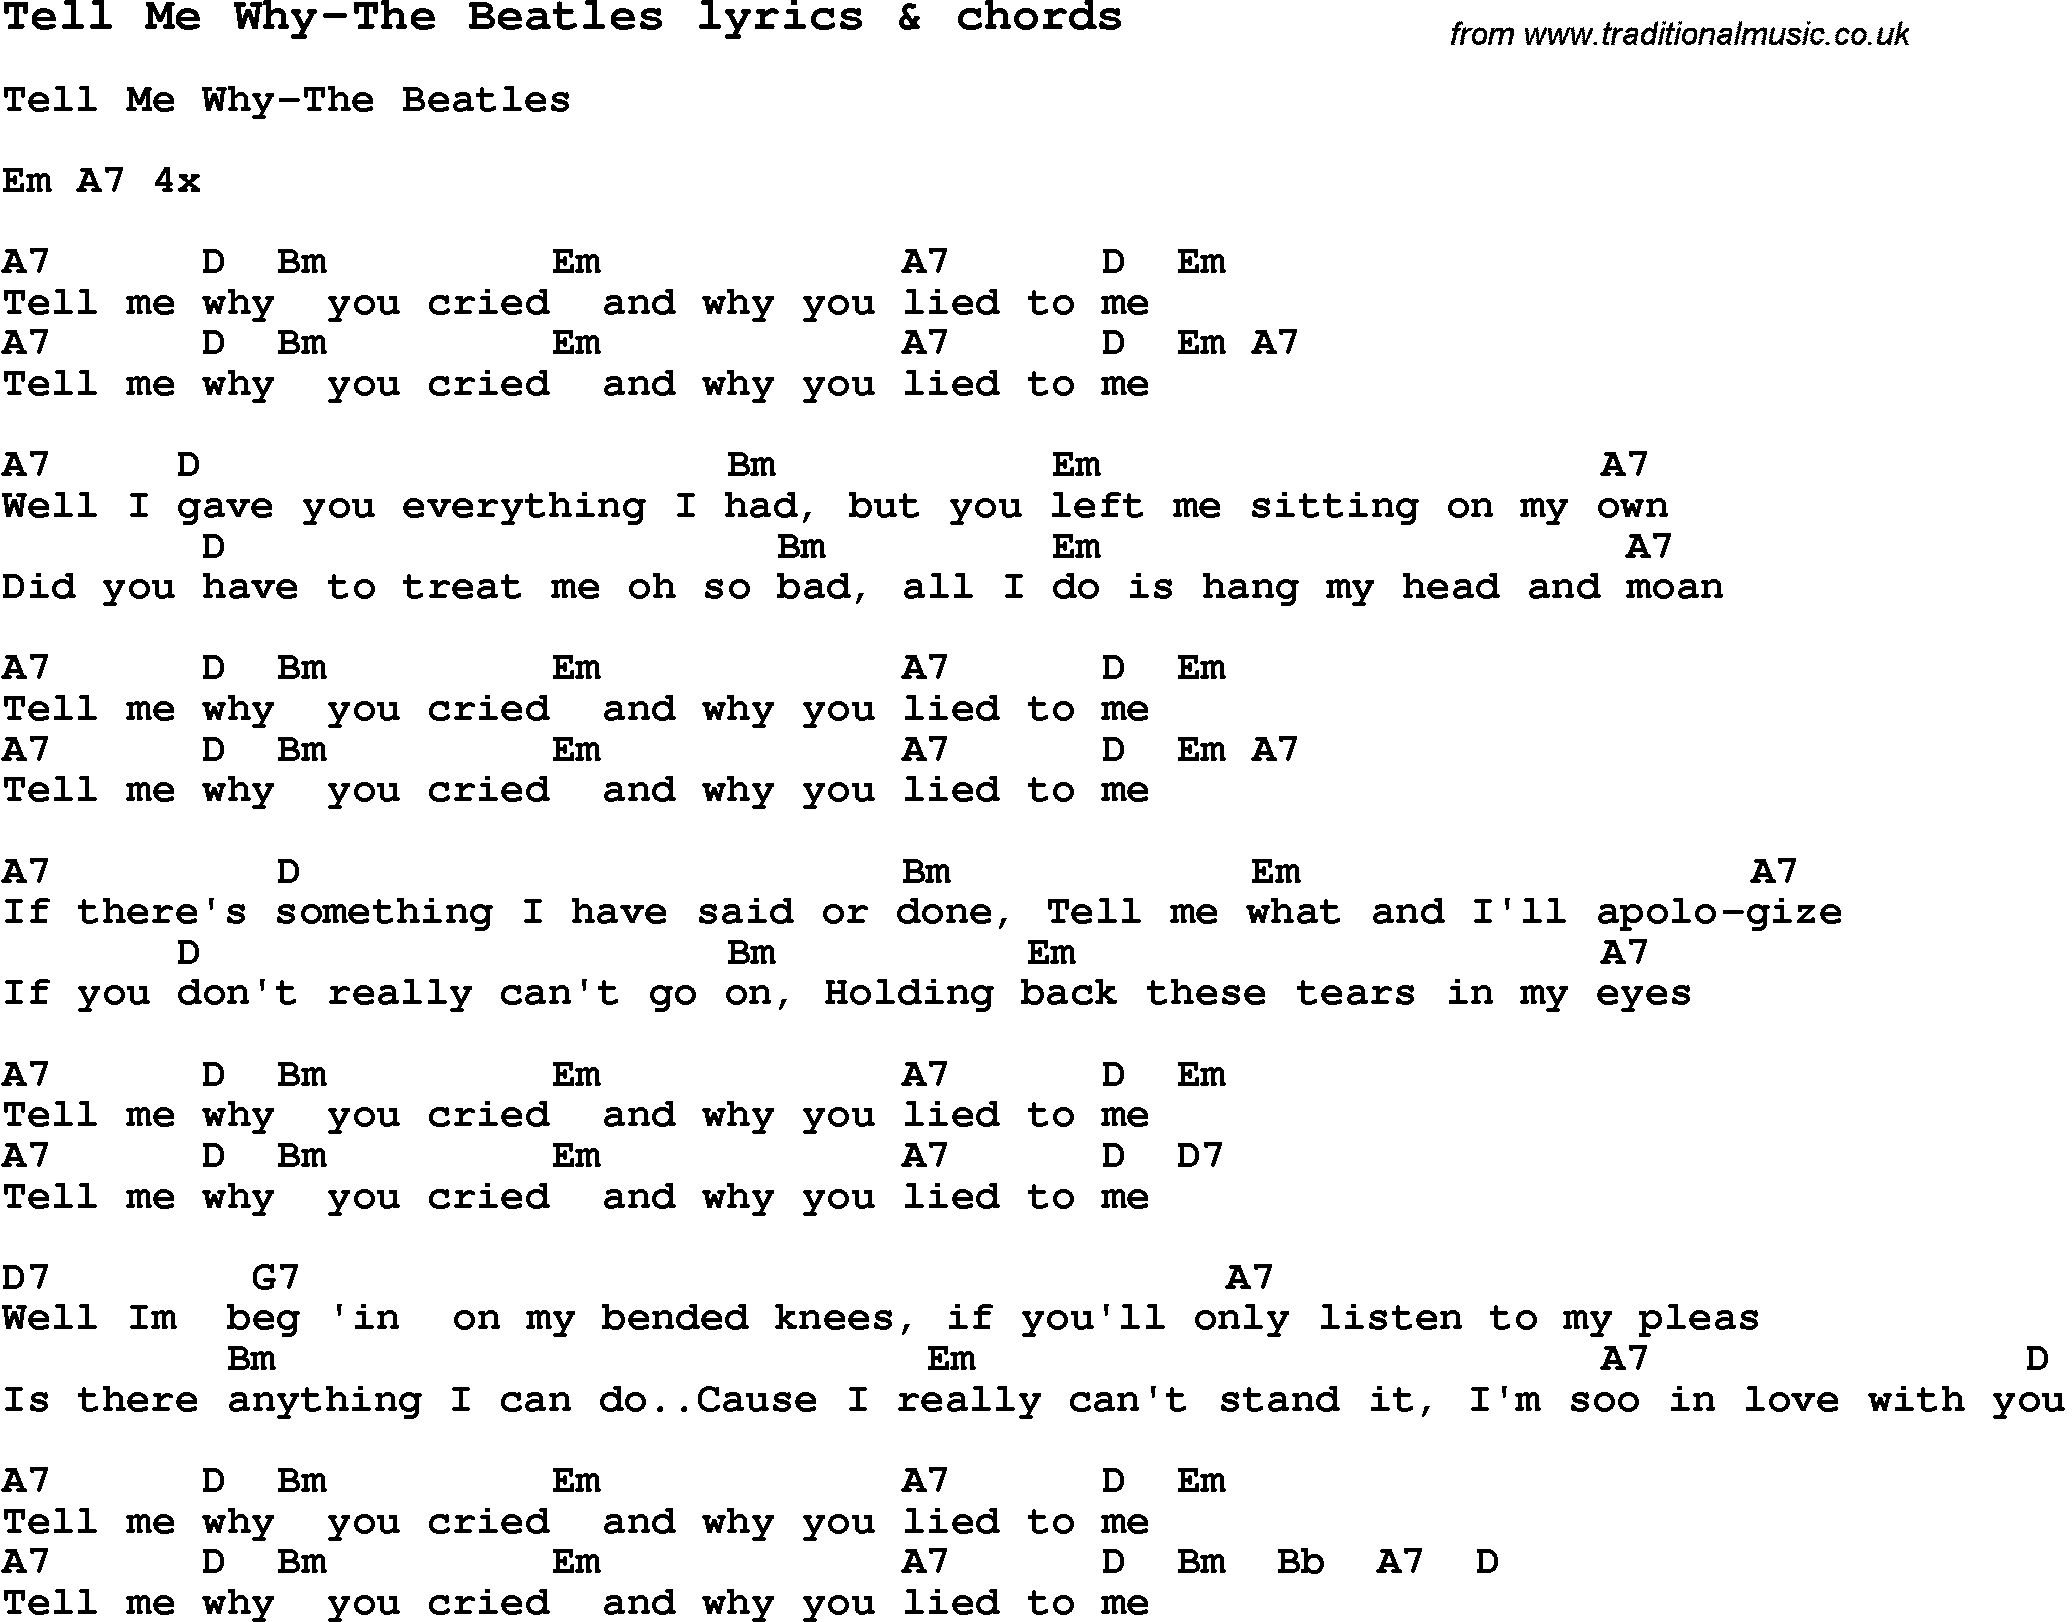 Love Song Lyrics for: Tell Me Why-The Beatles with chords for Ukulele, Guitar Banjo etc.